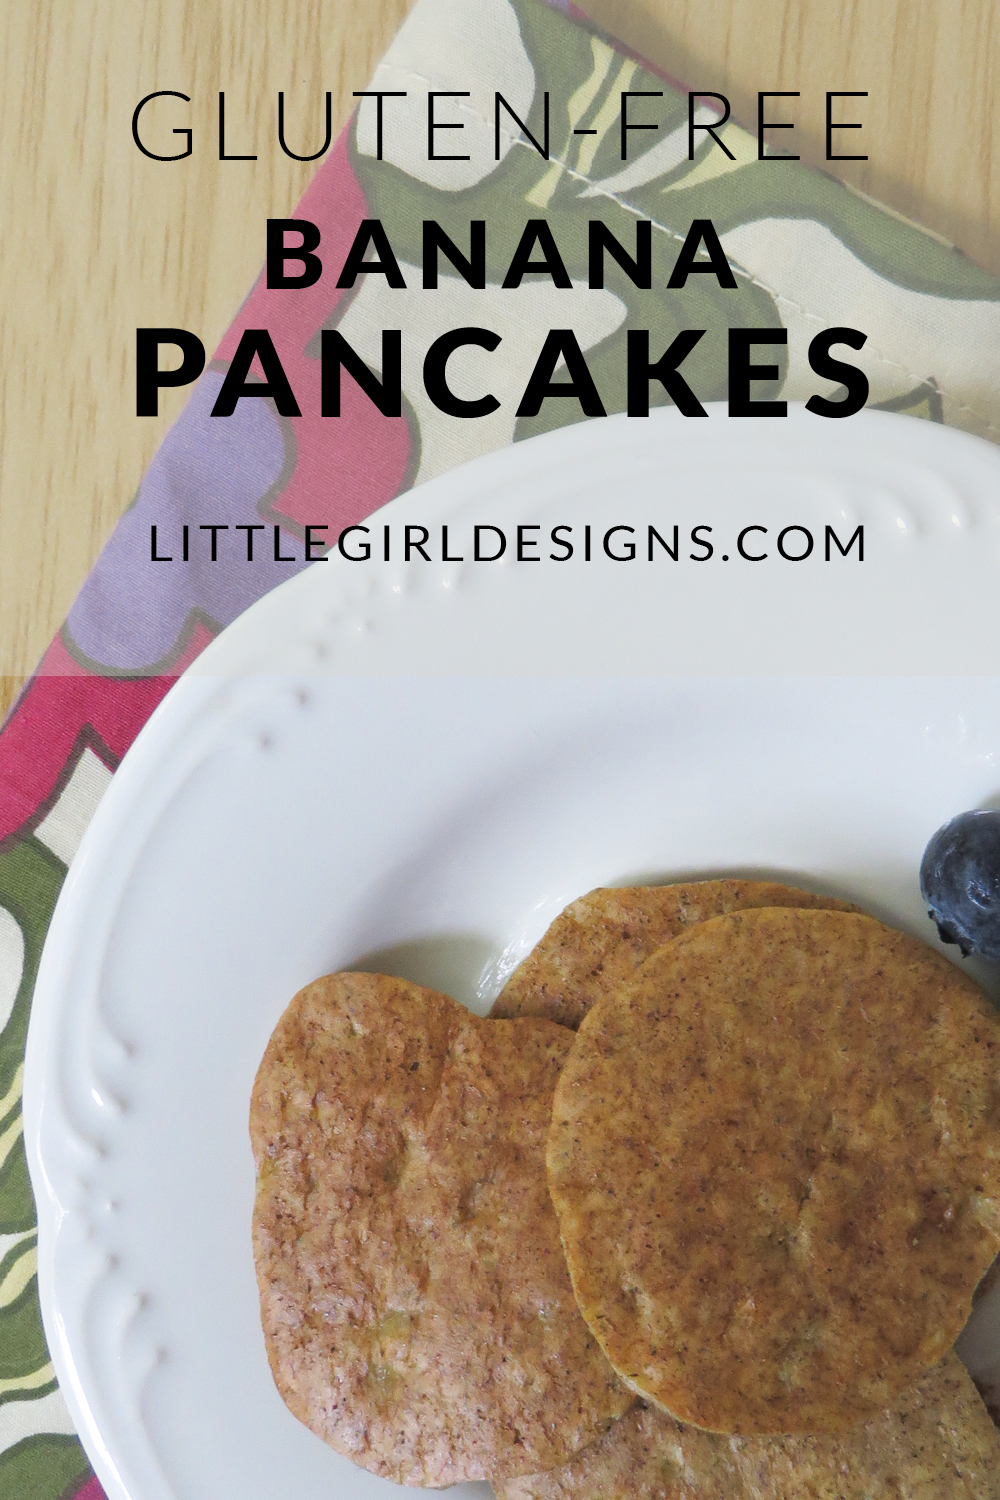 Here's a simple gluten-free pancake recipe for babies and toddlers (that you'll love too!) Gluten-free, dairy-free and delicious!